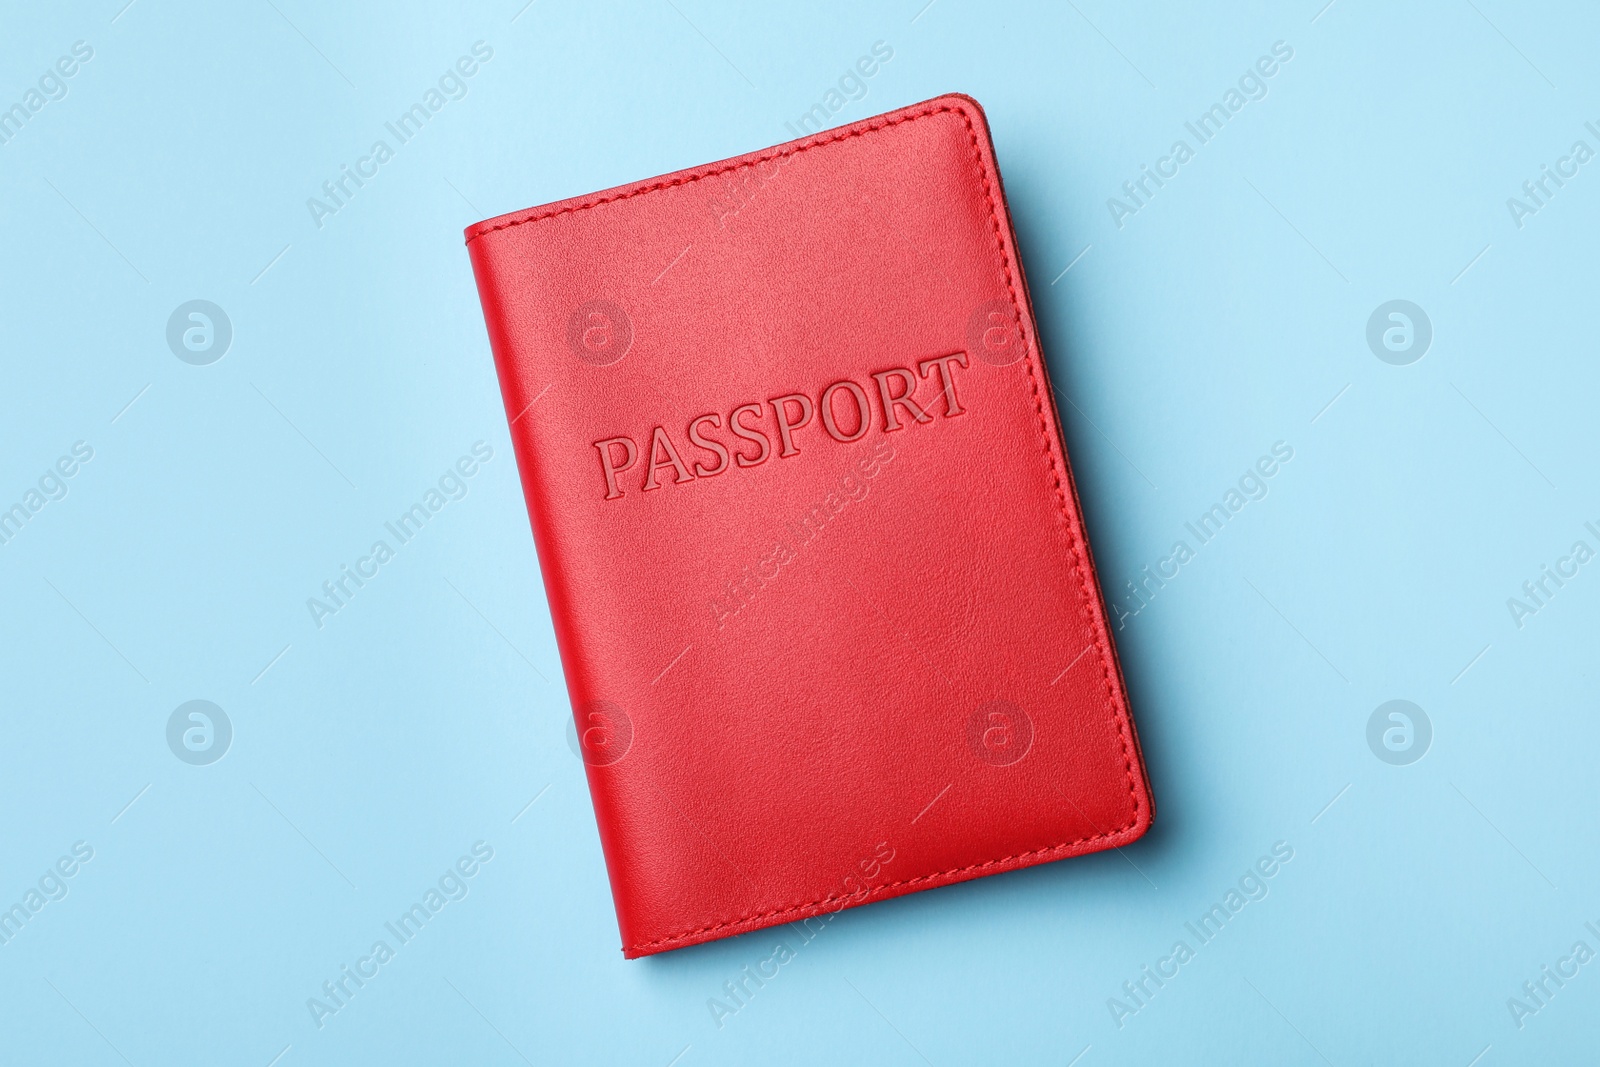 Photo of Passport in red leather case on light blue background, top view